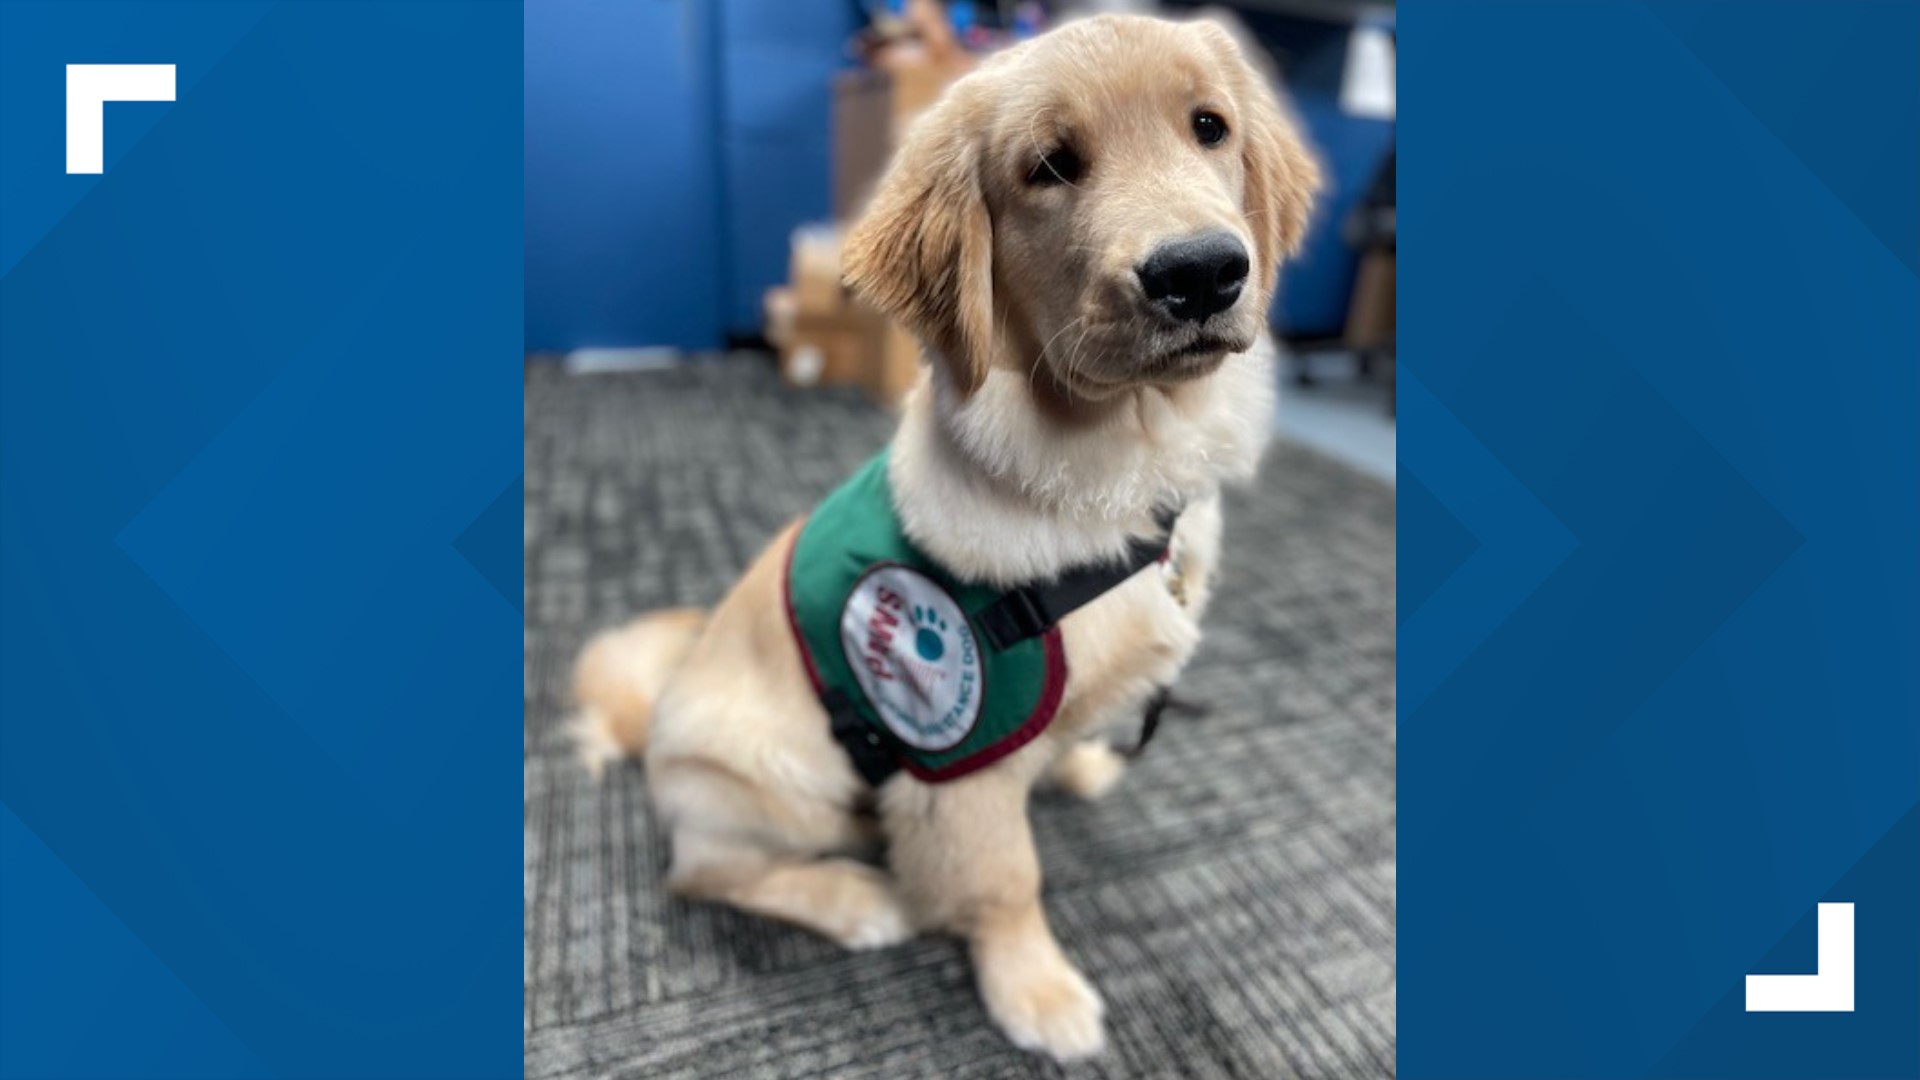 A new law in Michigan allows dogs training to become assistance dogs to enter businesses.